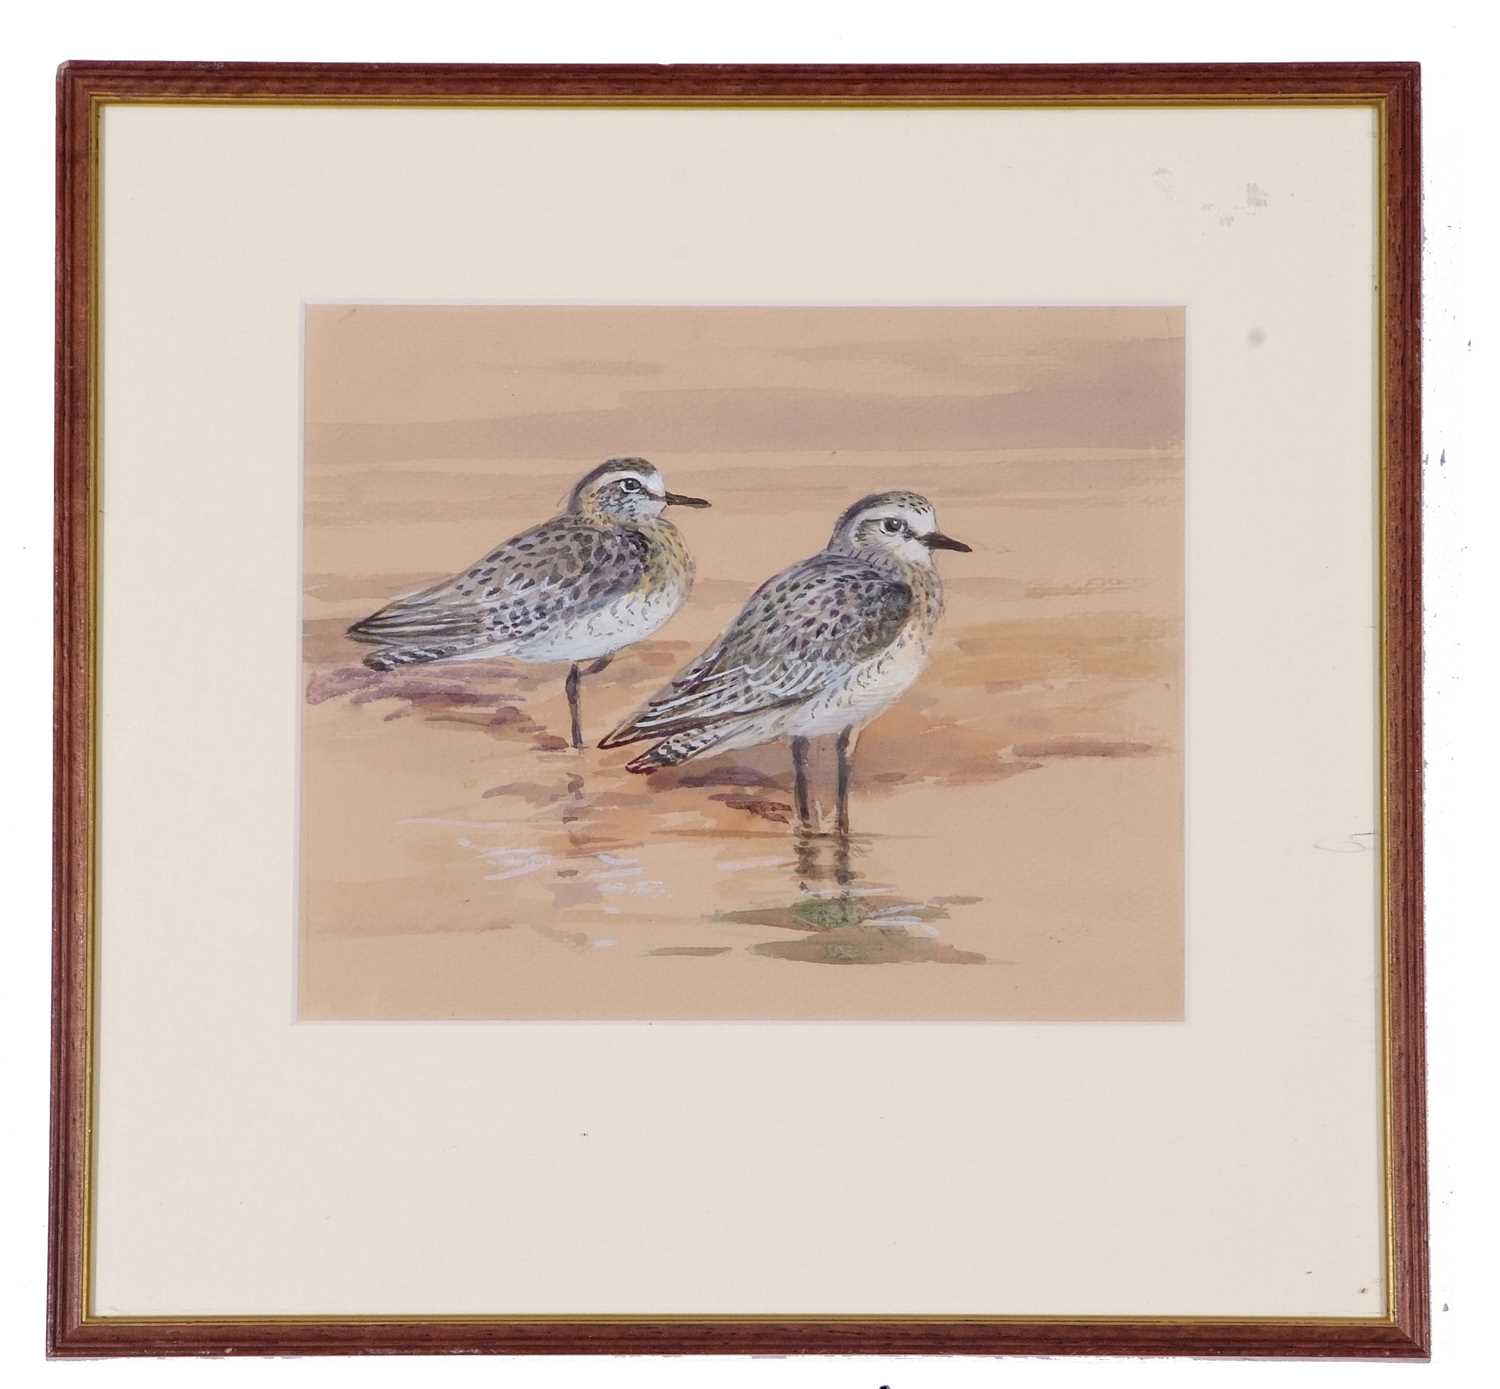 Roland Green (British, 1890-1972), British Grey Plover, watercolour, 7x8insQty: 1 - Image 2 of 2